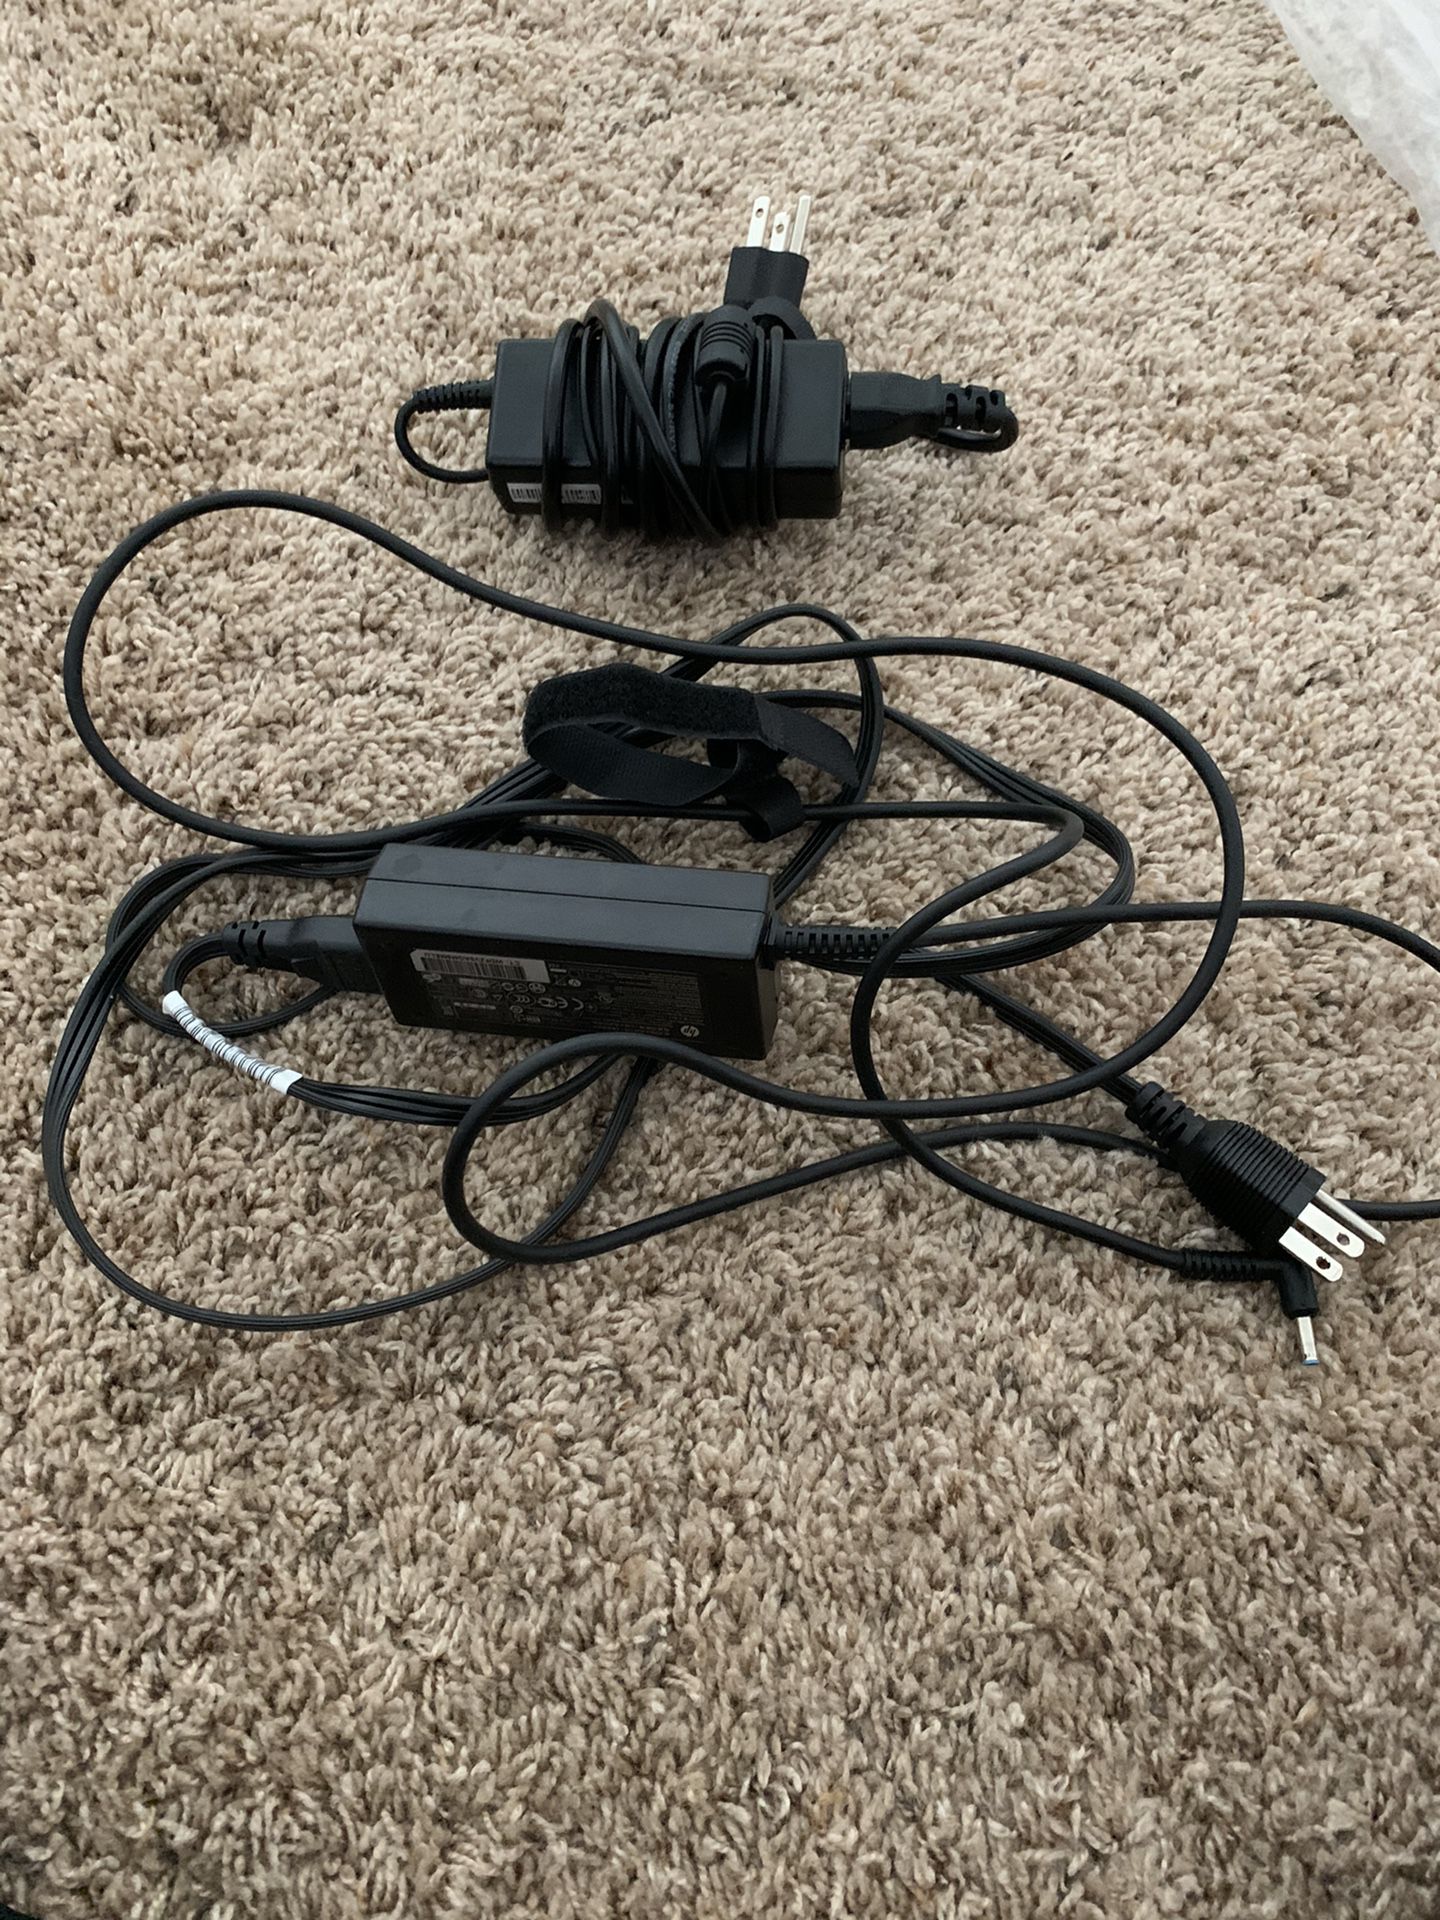 Laptop chargers